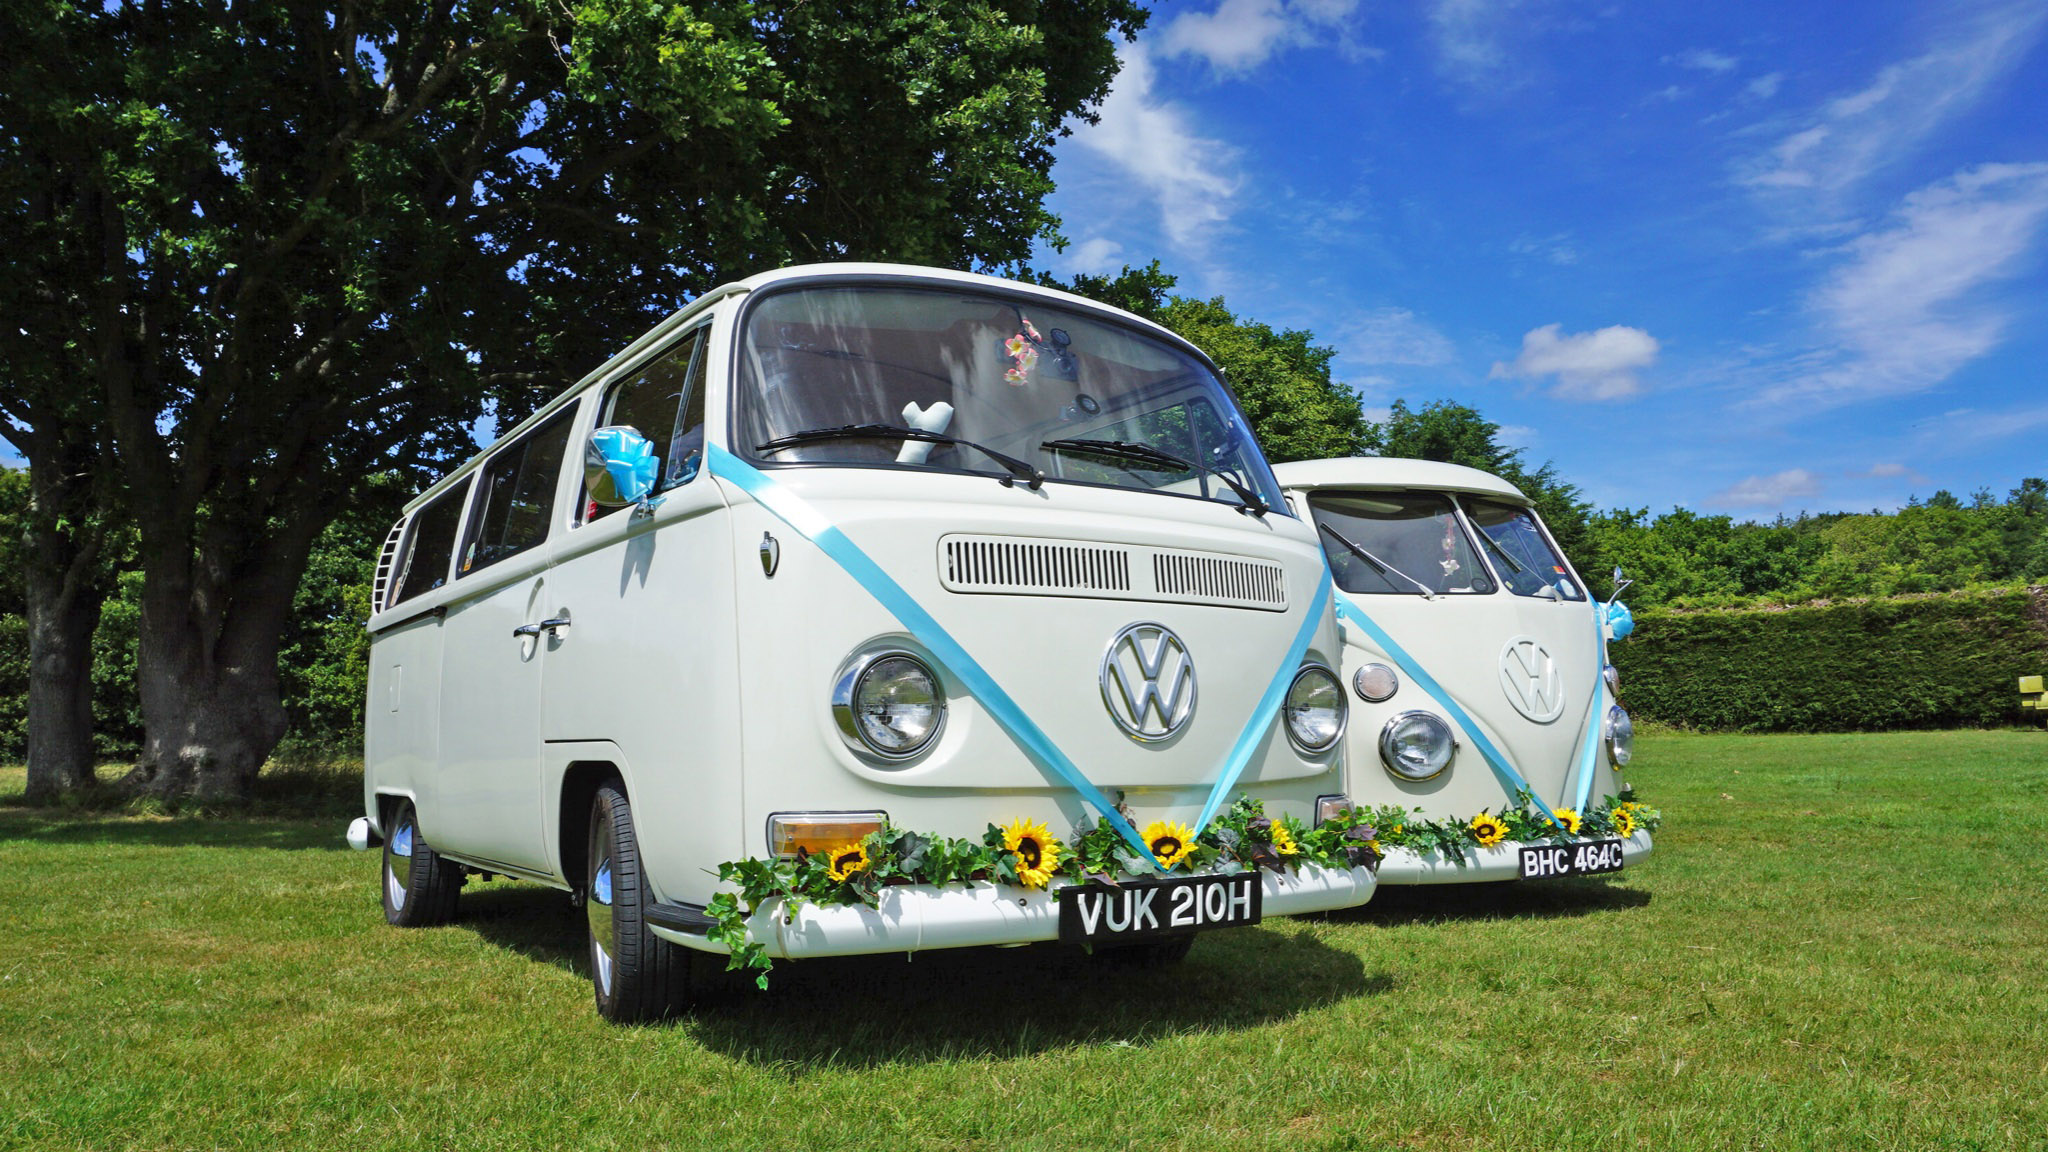 Two Classic VW Campervans decorated with turquoise blue Ribbons at a local Walton-on-Thames park with green trees in the background